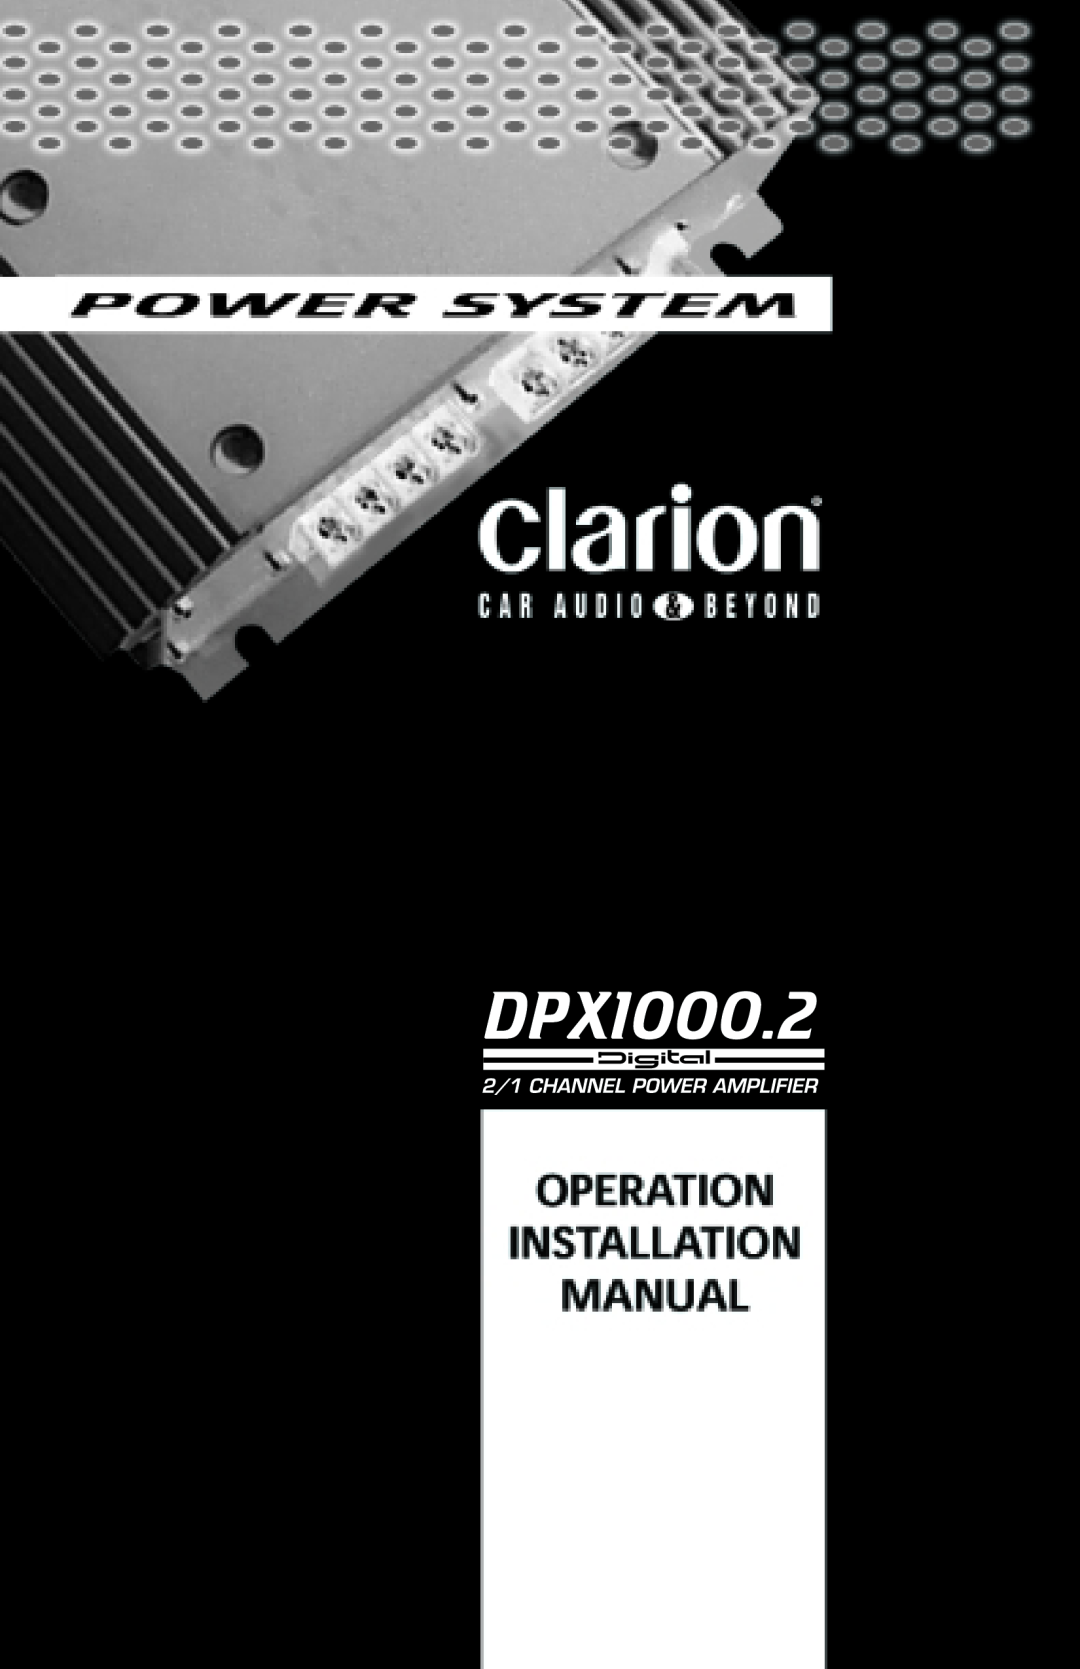 Clarion DPX1000.2 manual 